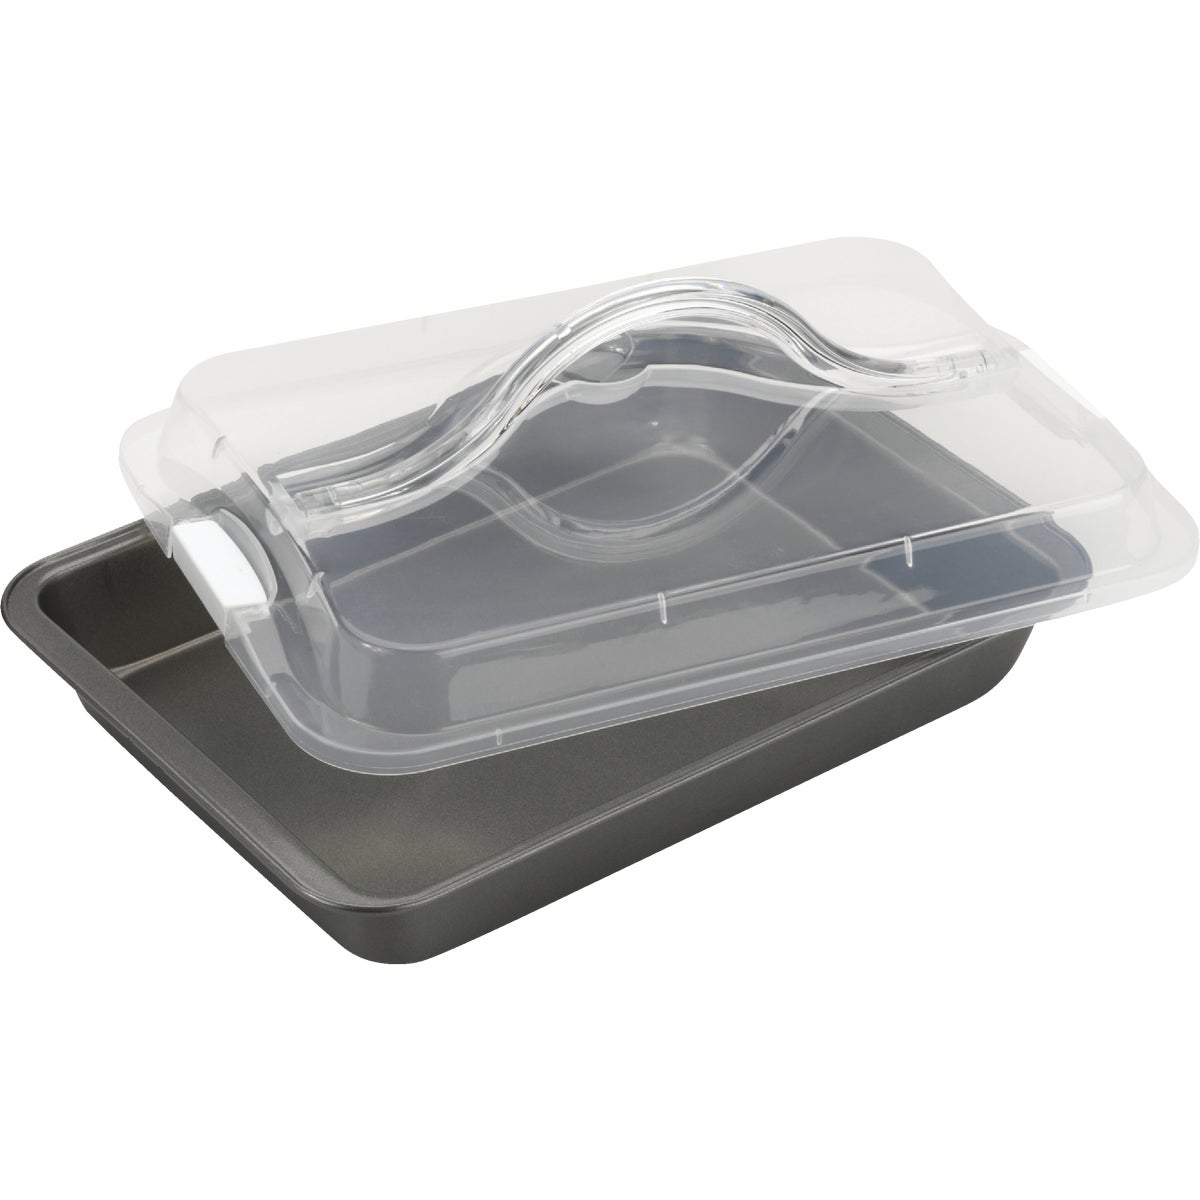 Goodcook Bake-n-Take 9 In. x 13 In. Covered Non-Stick Cake Pan